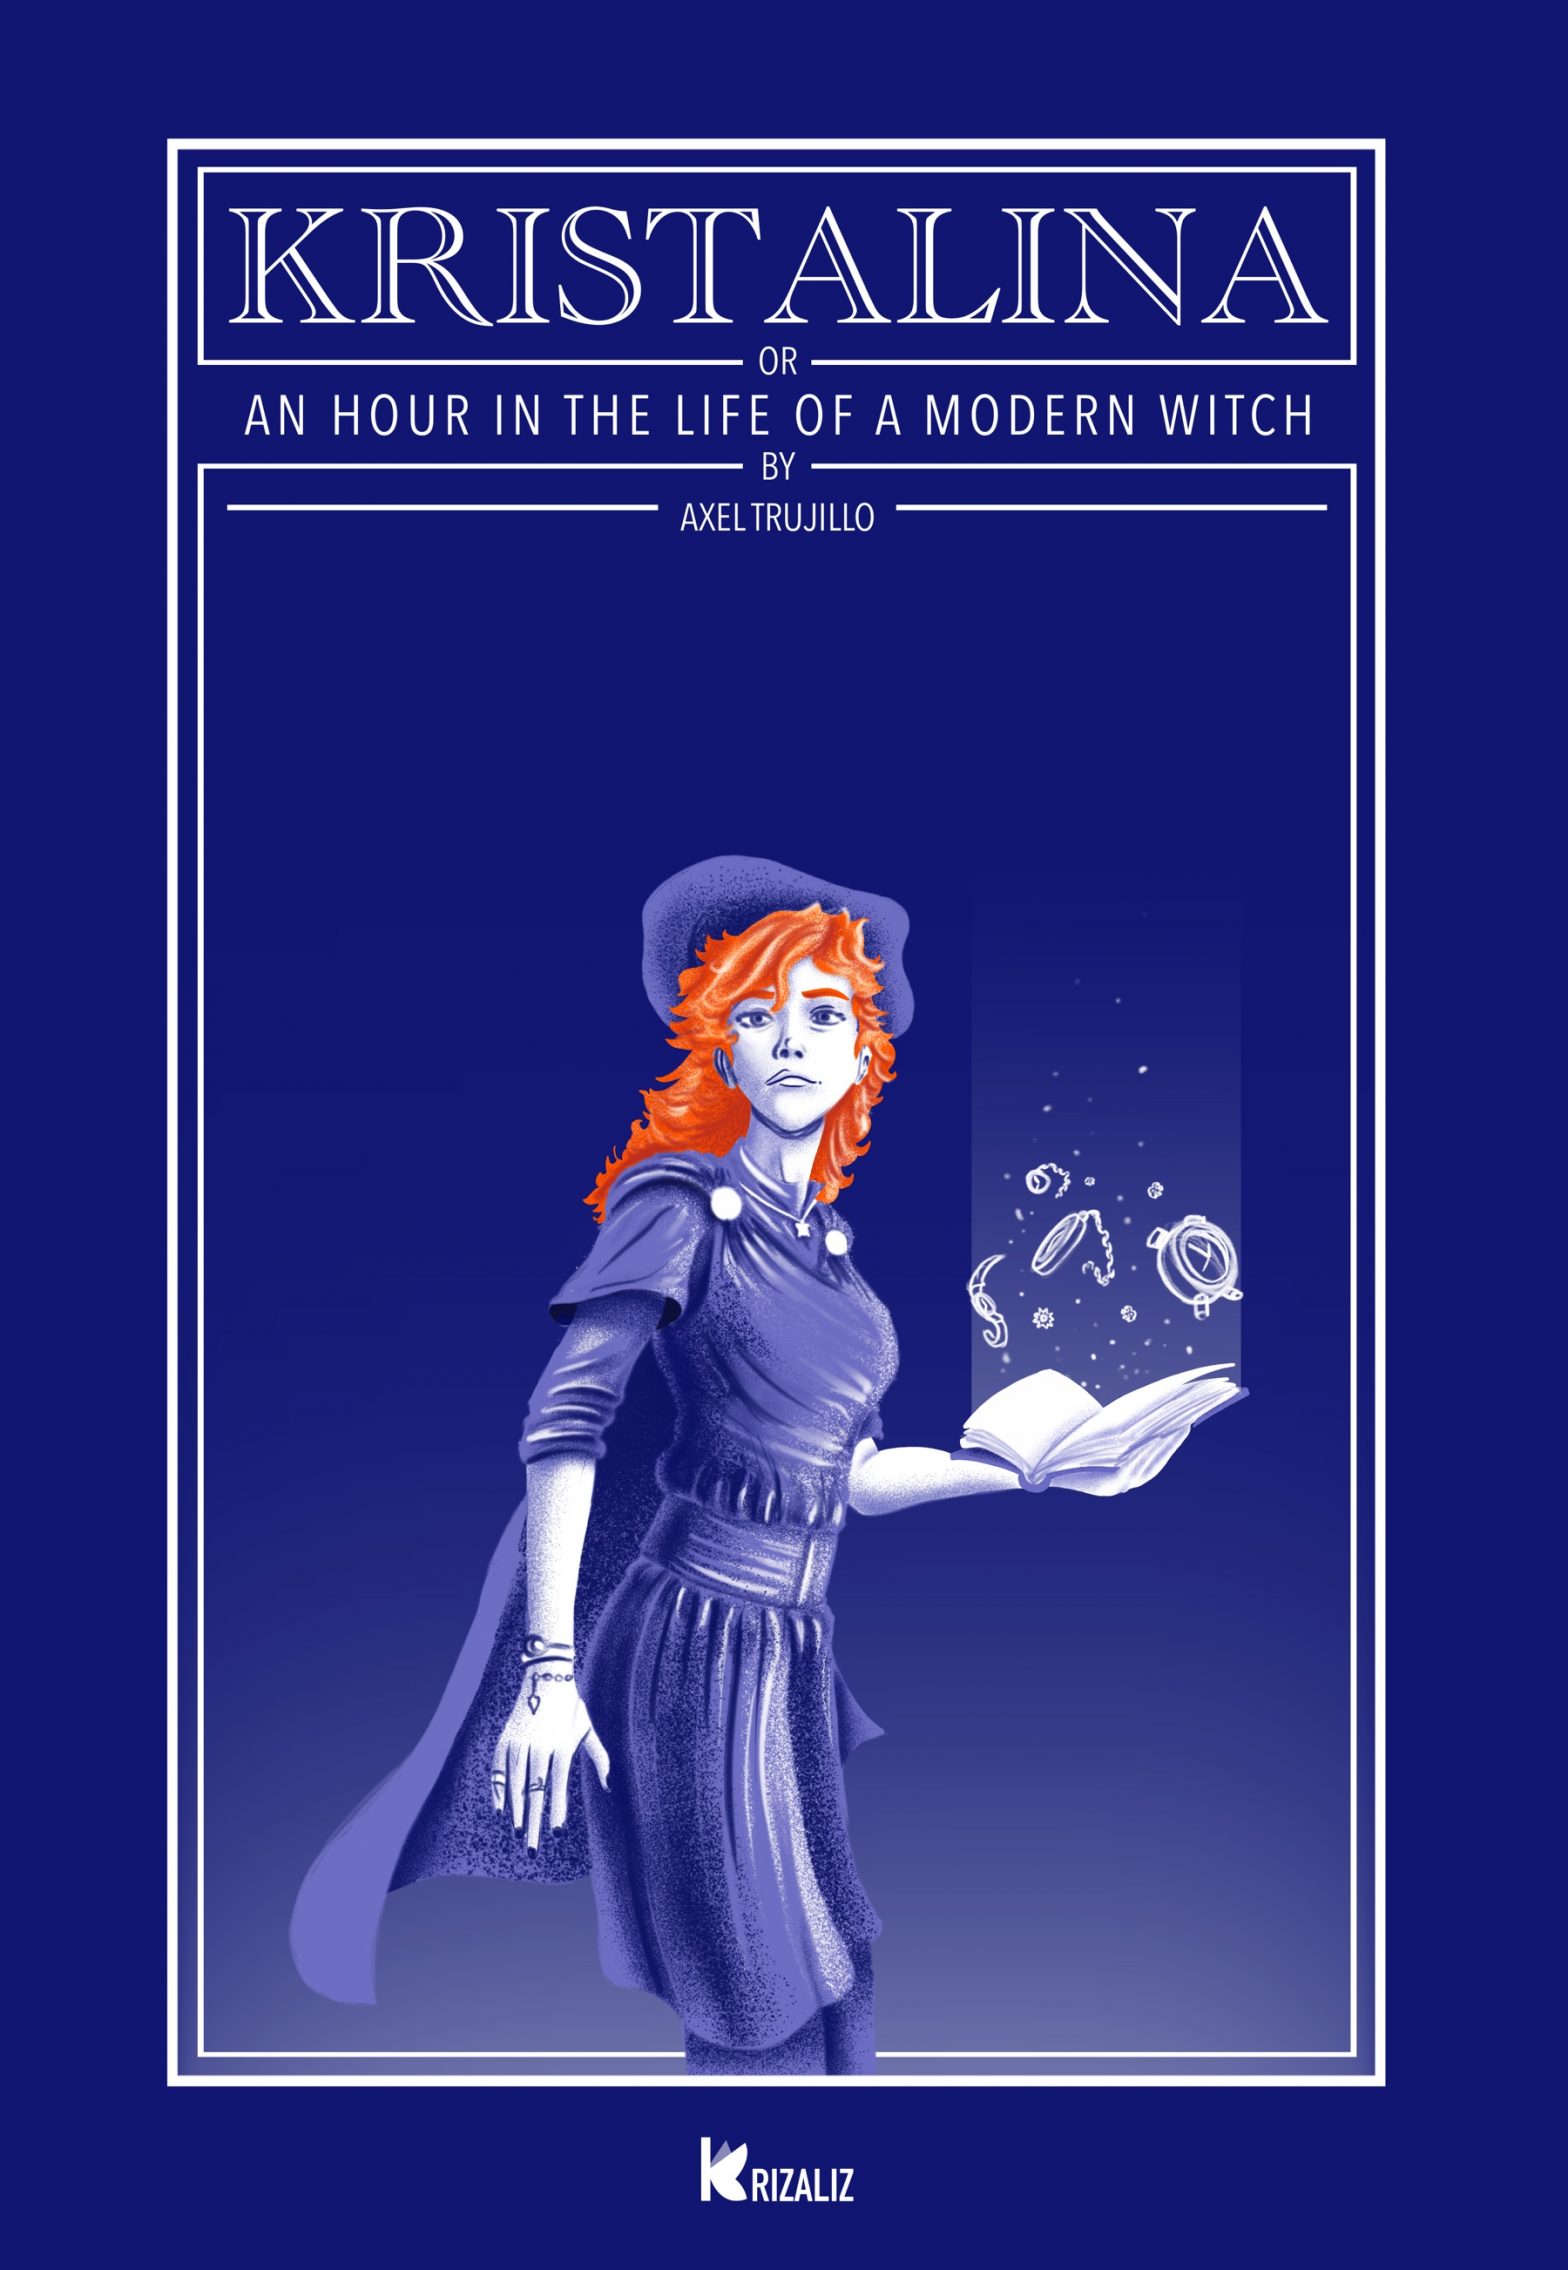 Kristalina or an hour in the life of a modern witch: a short story about magic and being stuck outside of time.